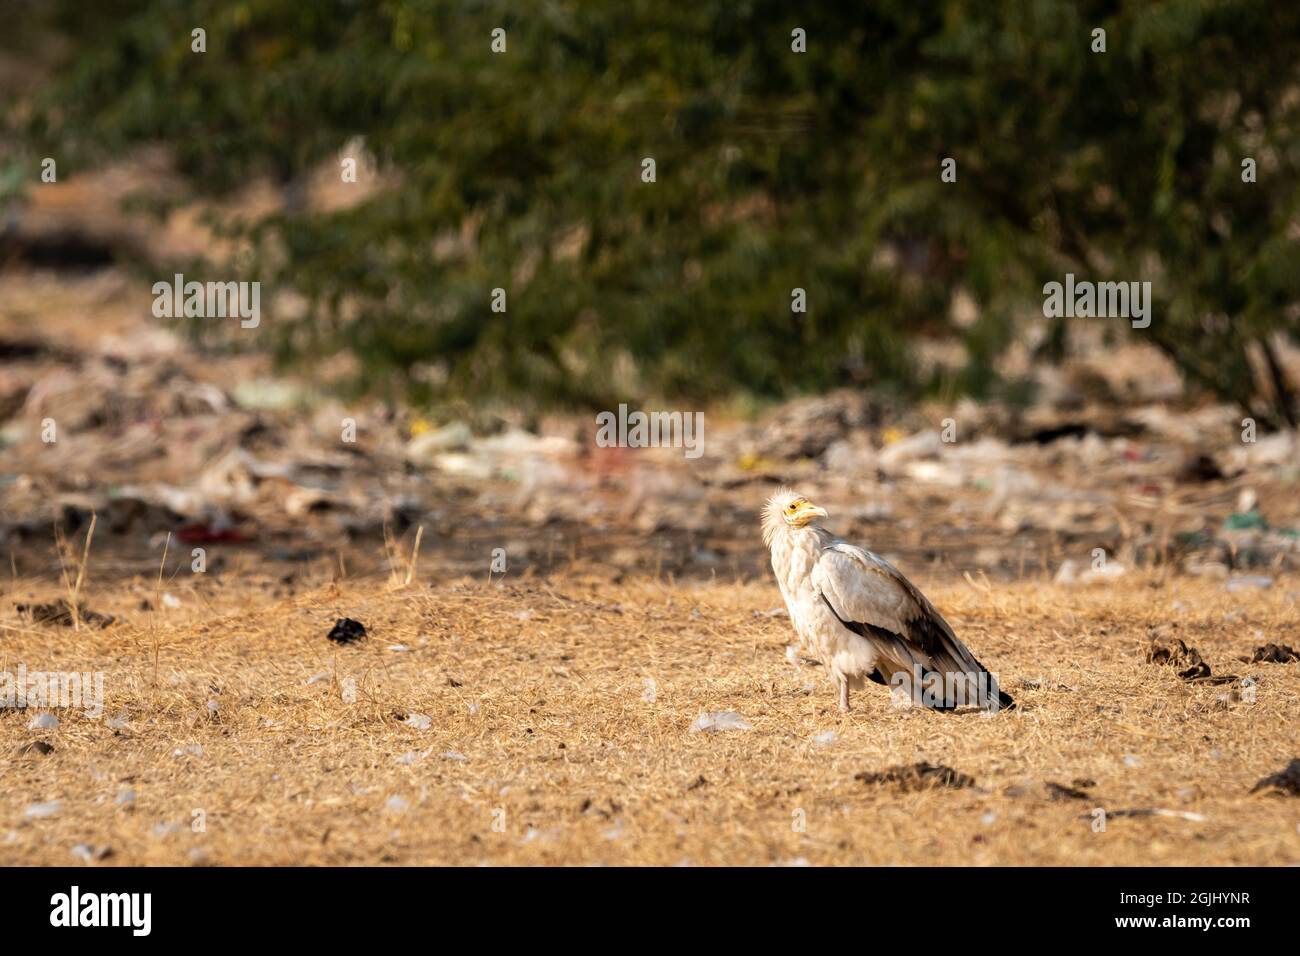 Egyptian vulture or Neophron percnopterus bird at jorbeer conservation reserve bikaner rajasthan India Stock Photo